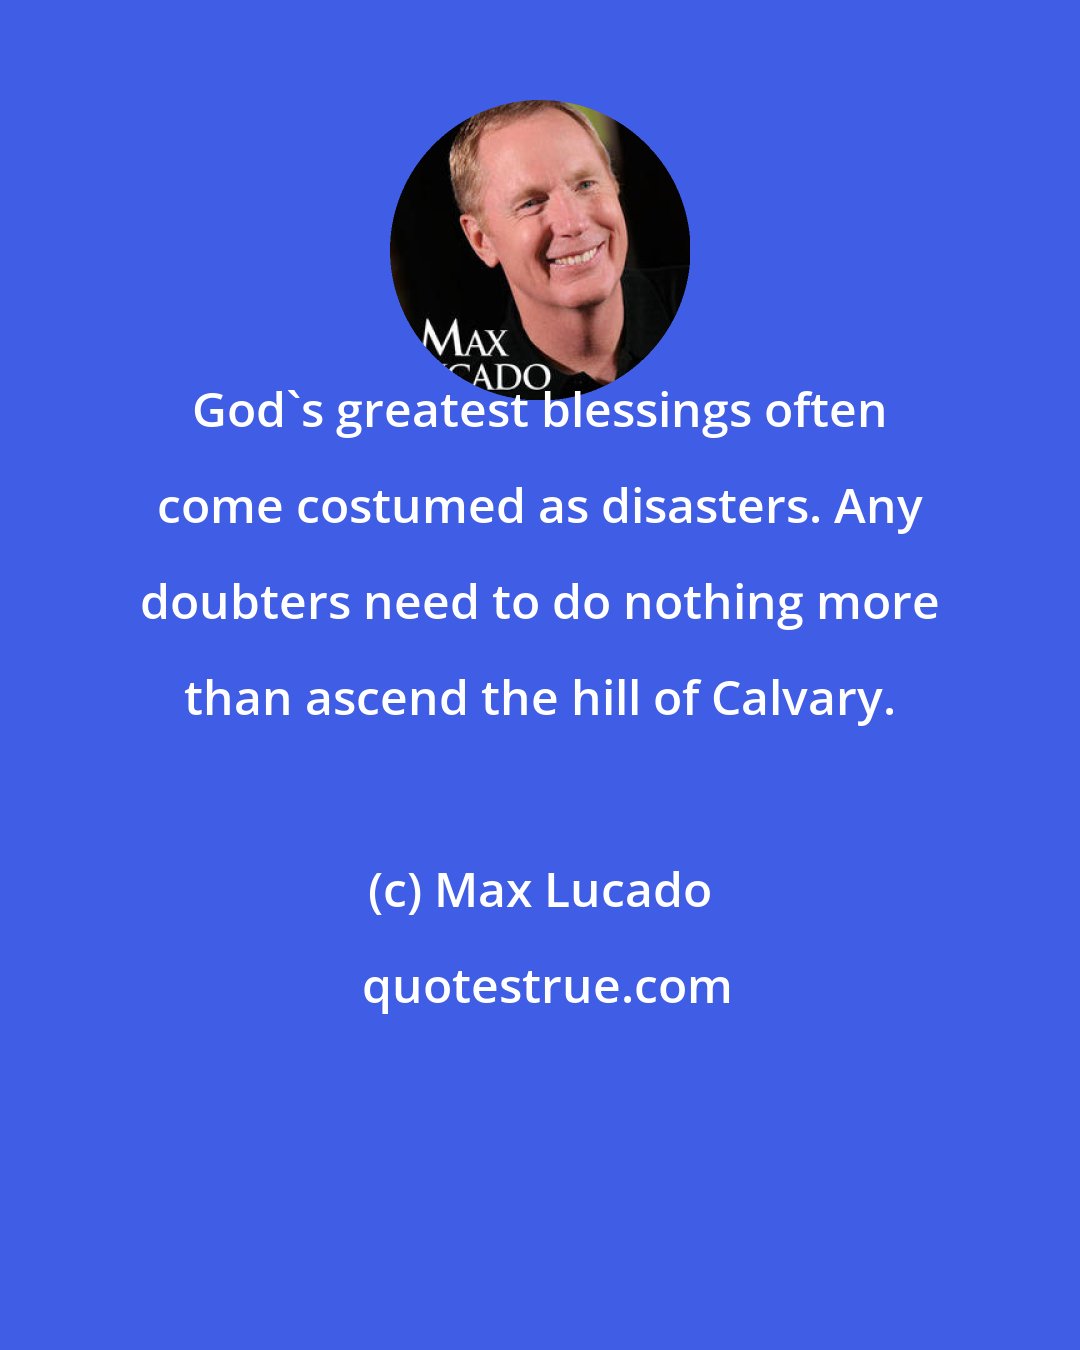 Max Lucado: God's greatest blessings often come costumed as disasters. Any doubters need to do nothing more than ascend the hill of Calvary.